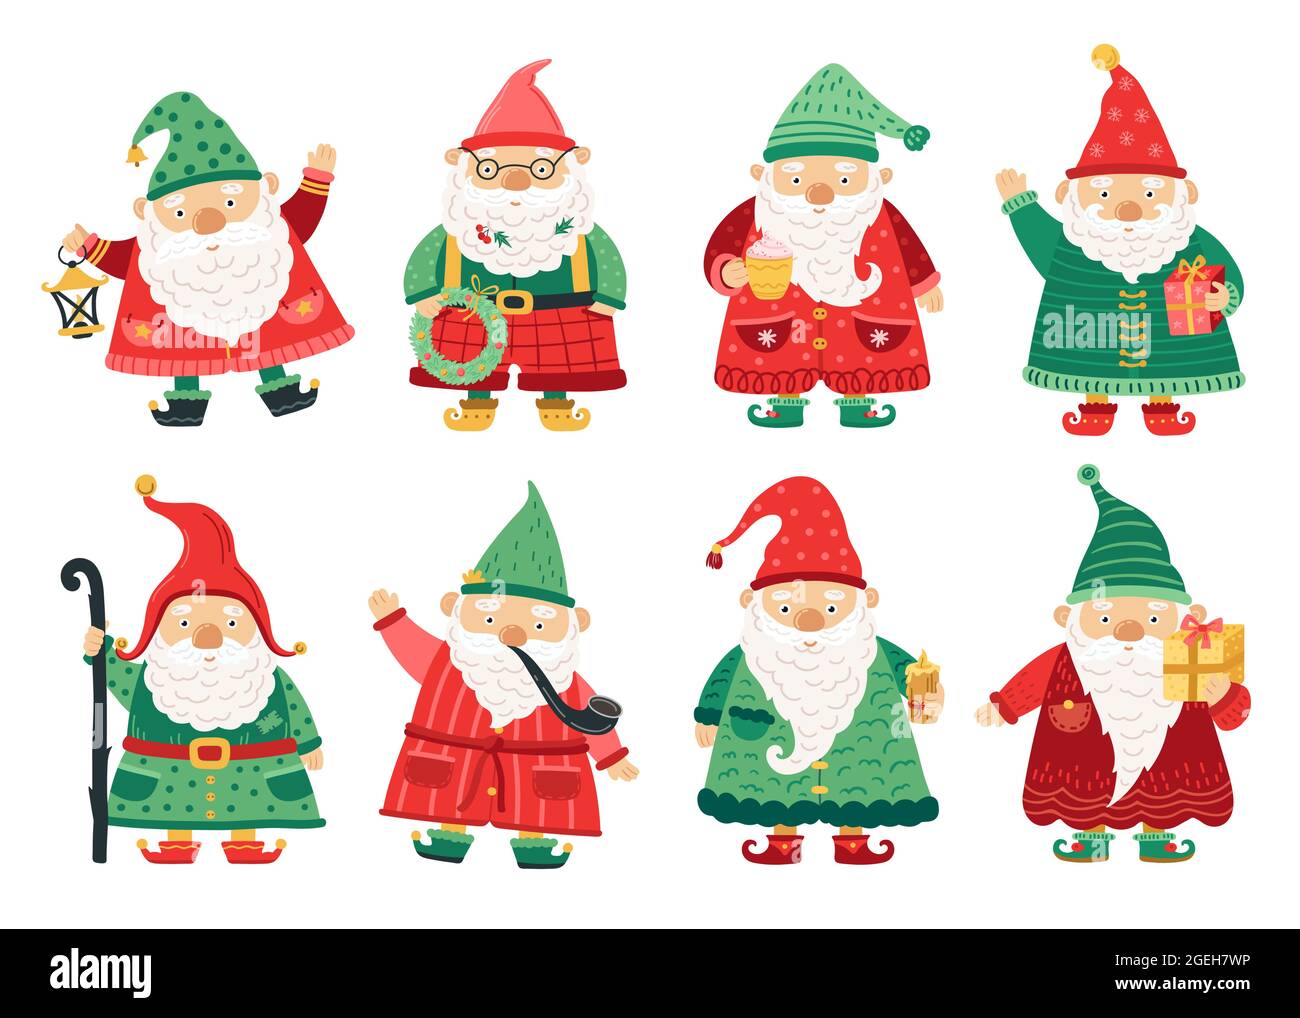 Christmas dwarfs. Cute fairytale gnome, old beard men greeting with x-mas. Home garden magical characters, winter holiday fantasy vector set Stock Vector